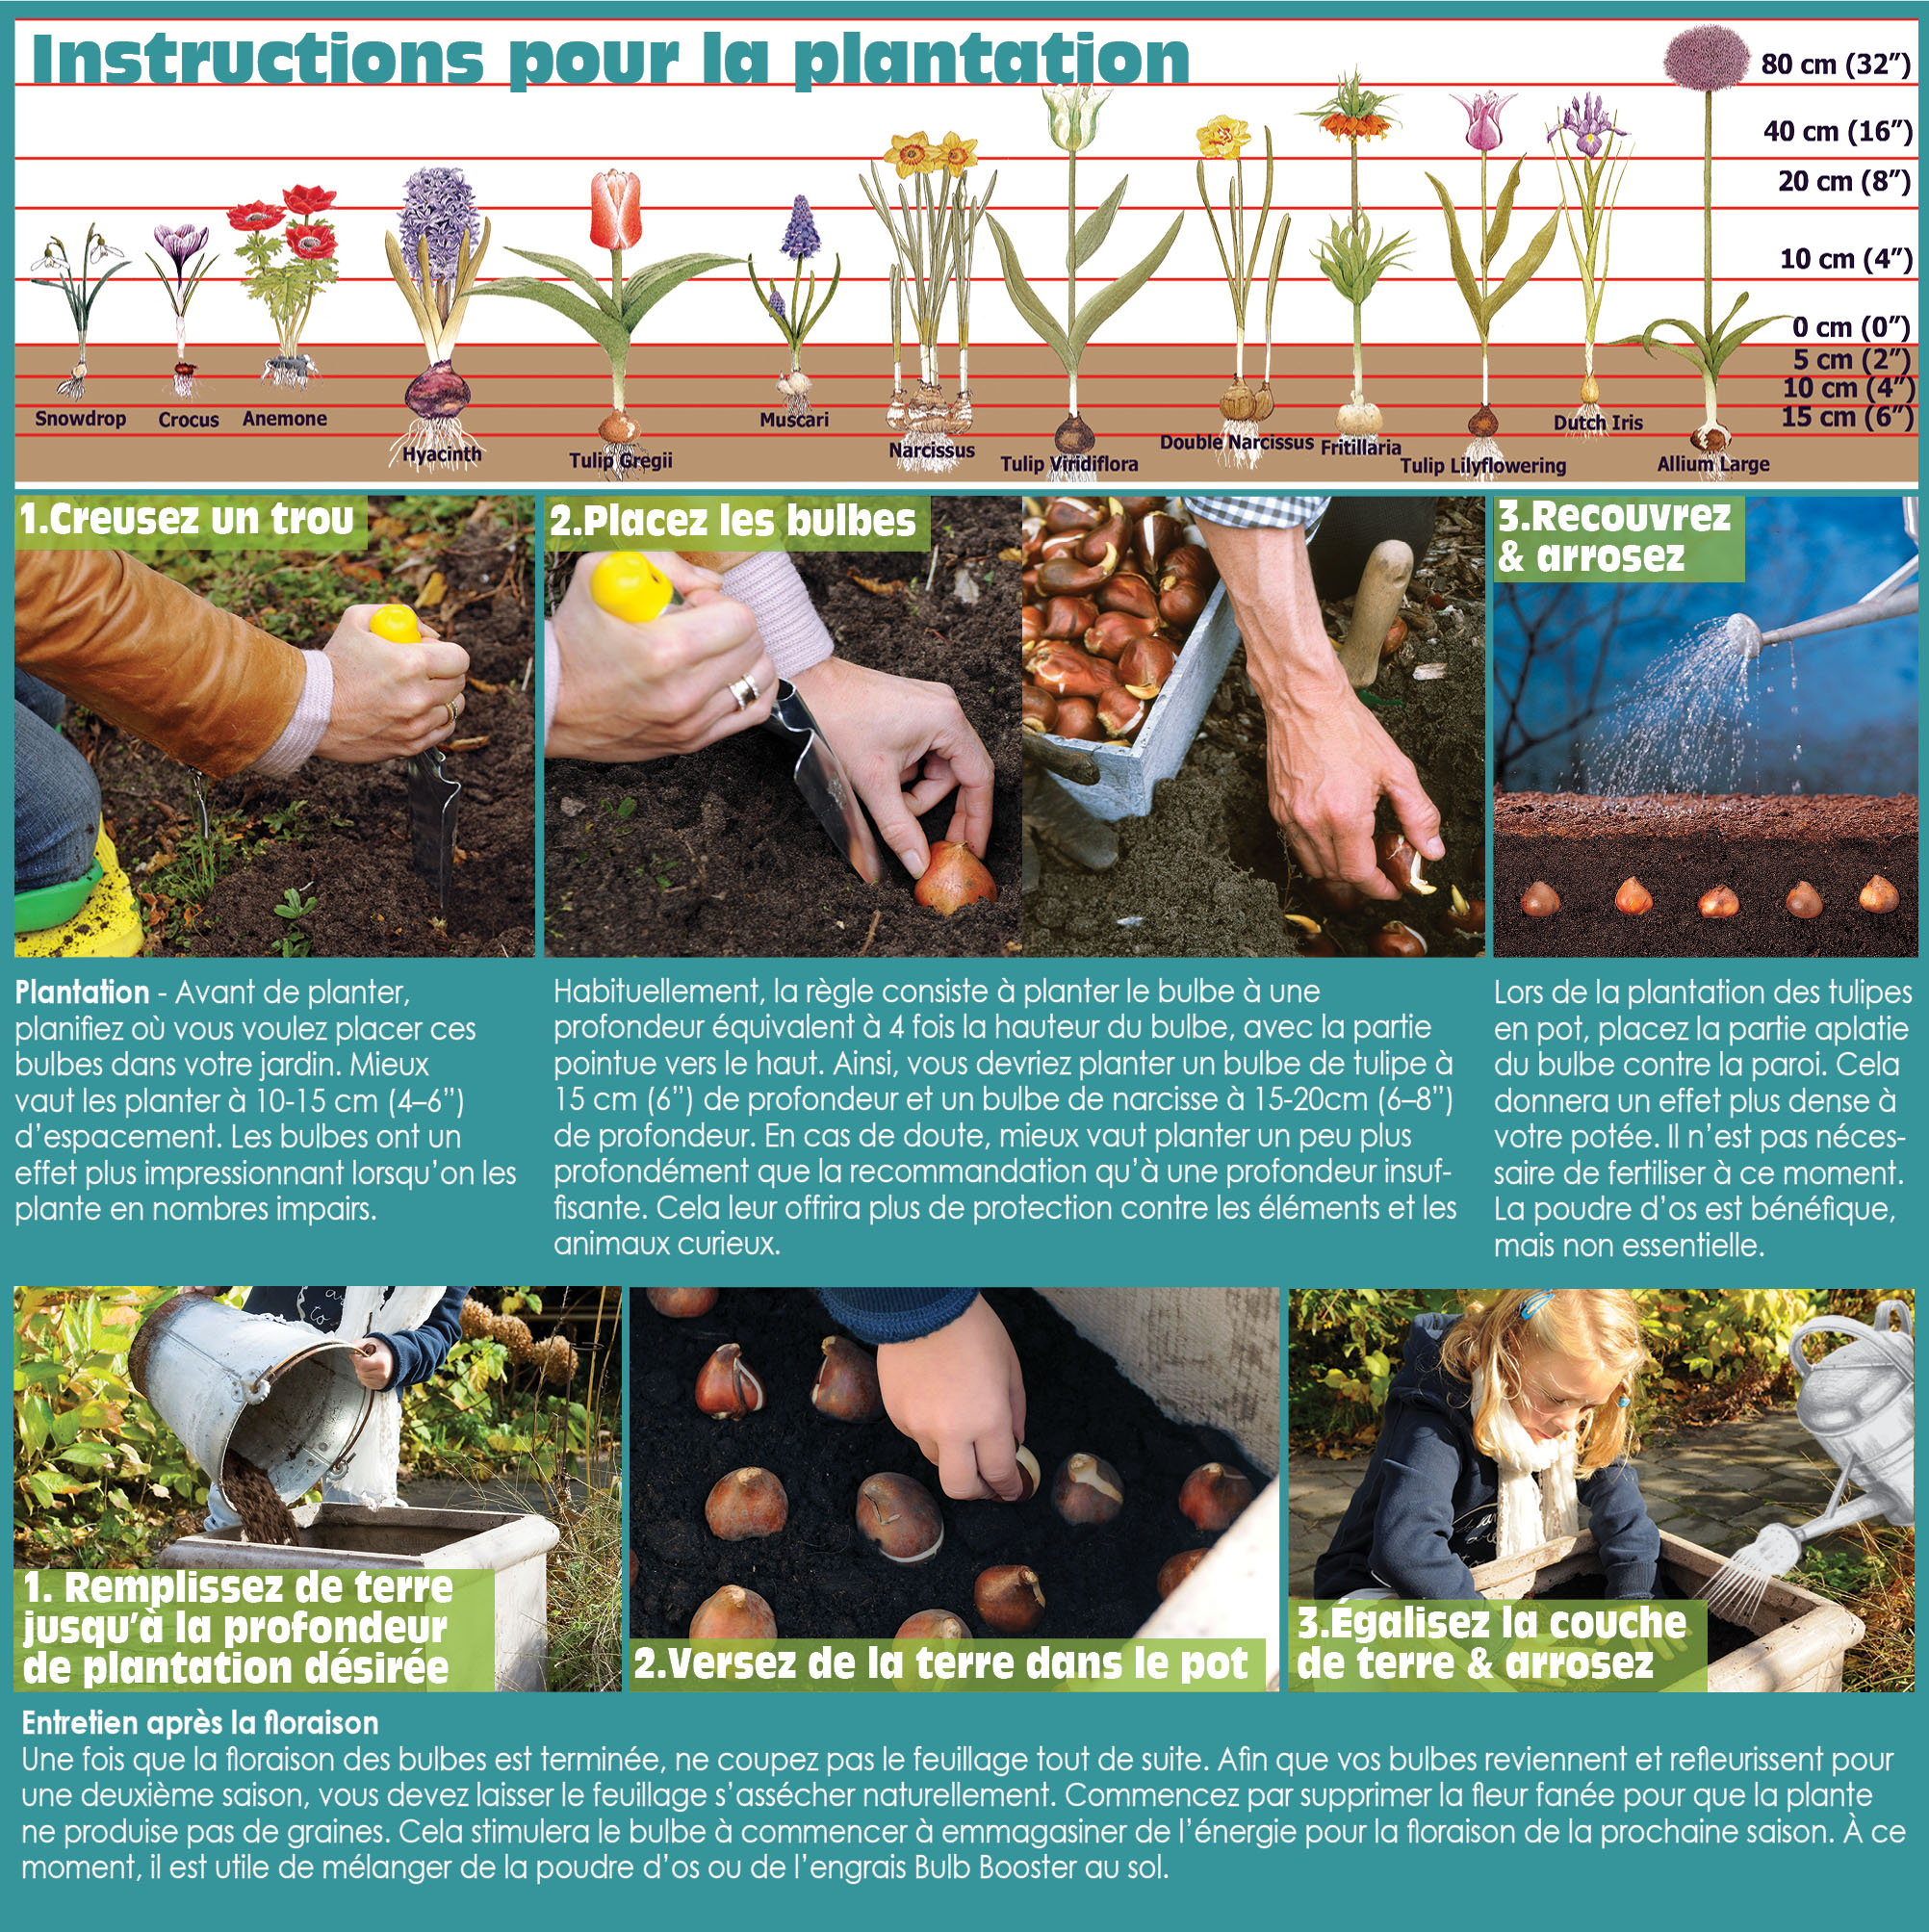 How to Plant Spring Bulbs in the Fall - French Instructions